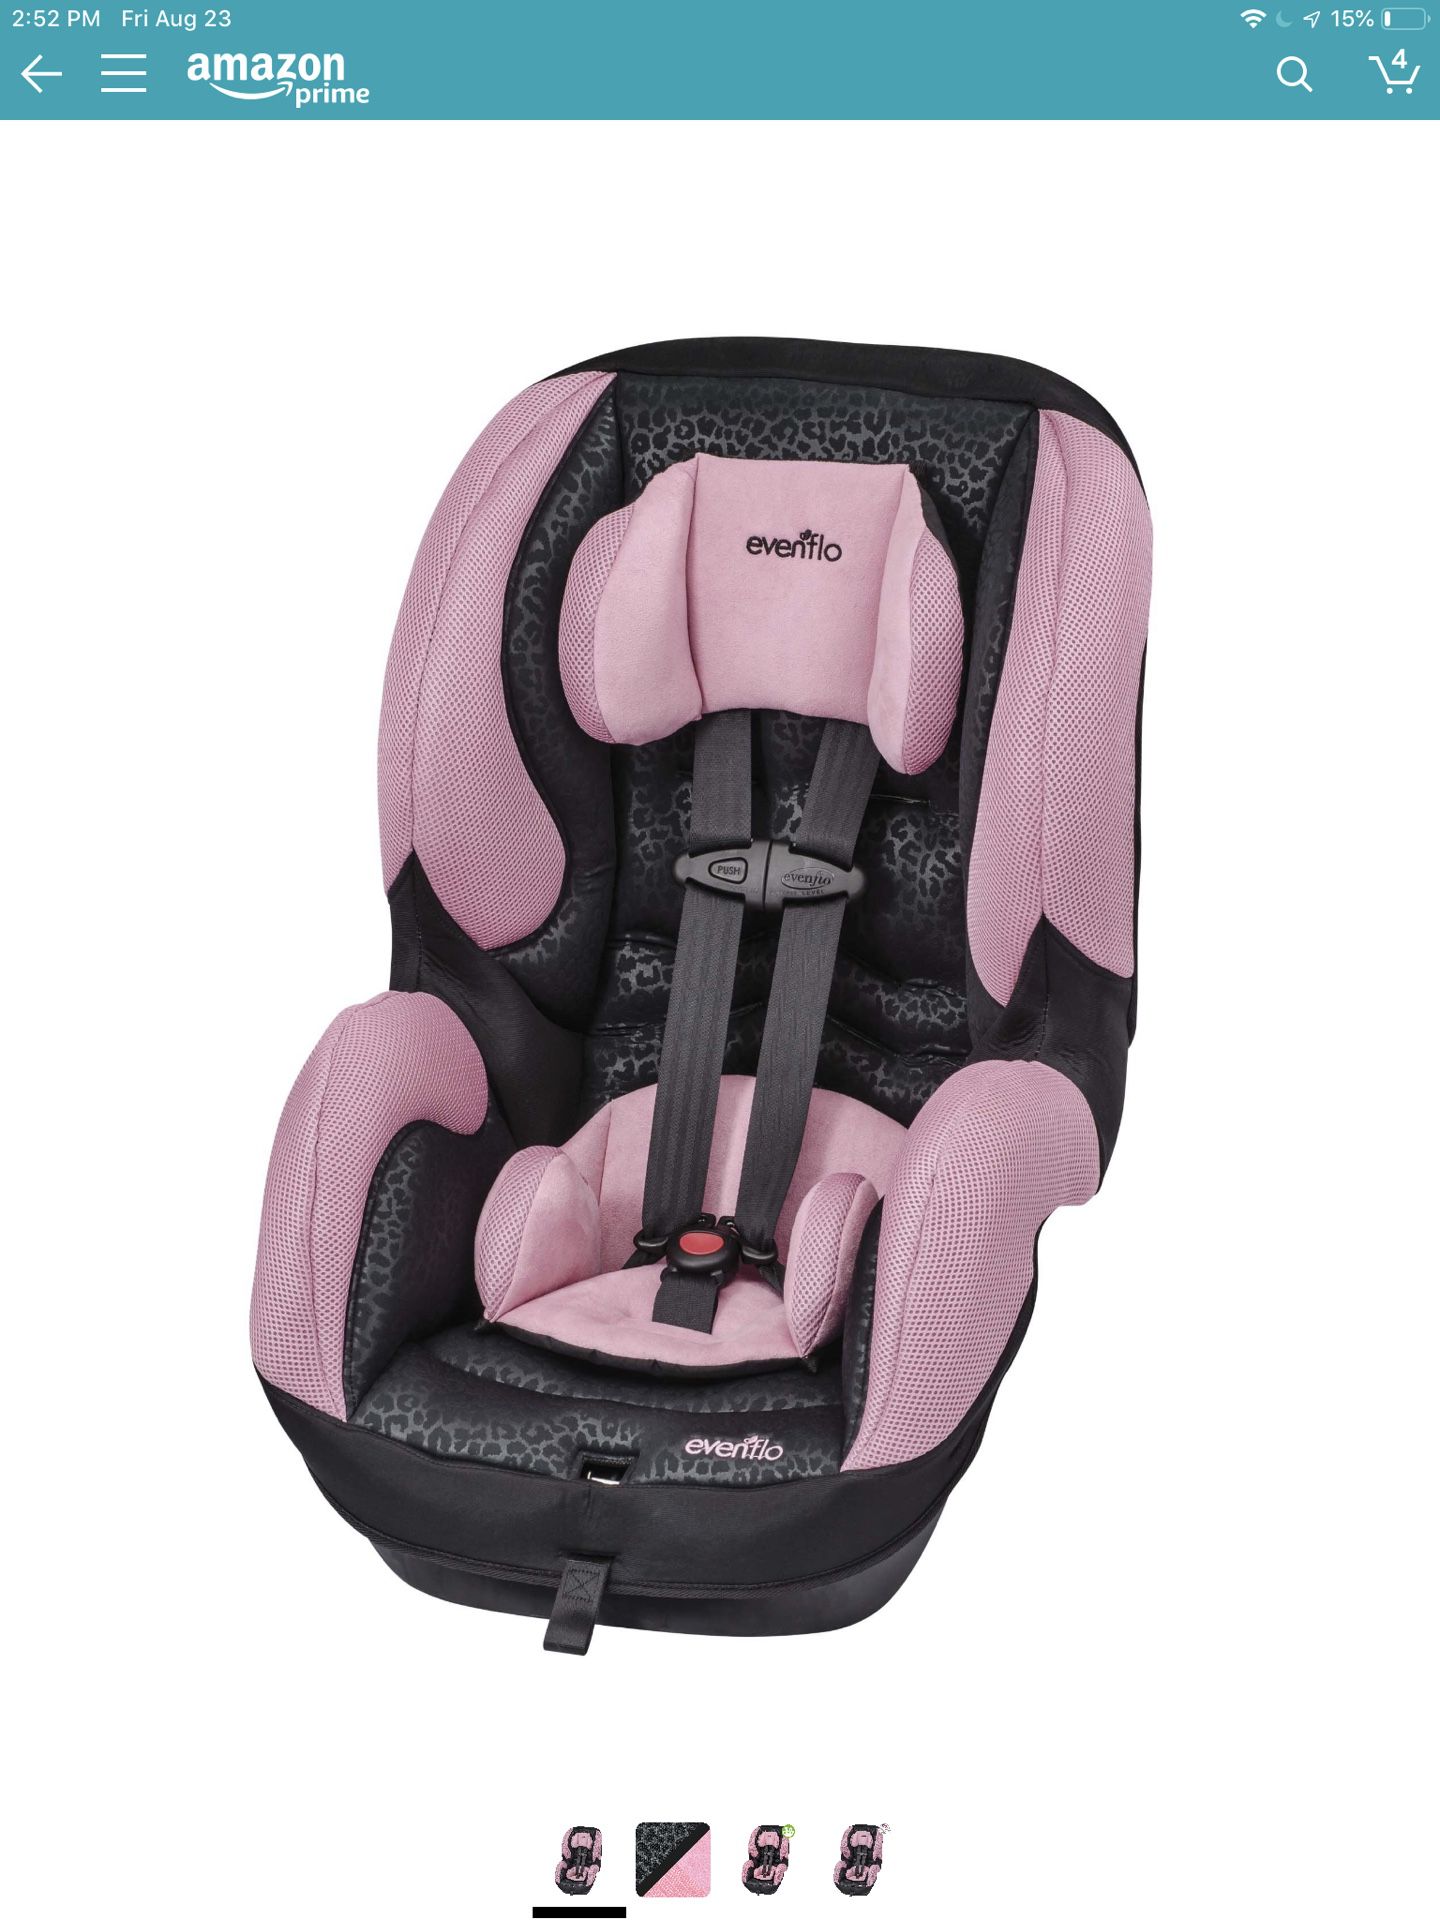 Evnflo Toddler and infant car seat